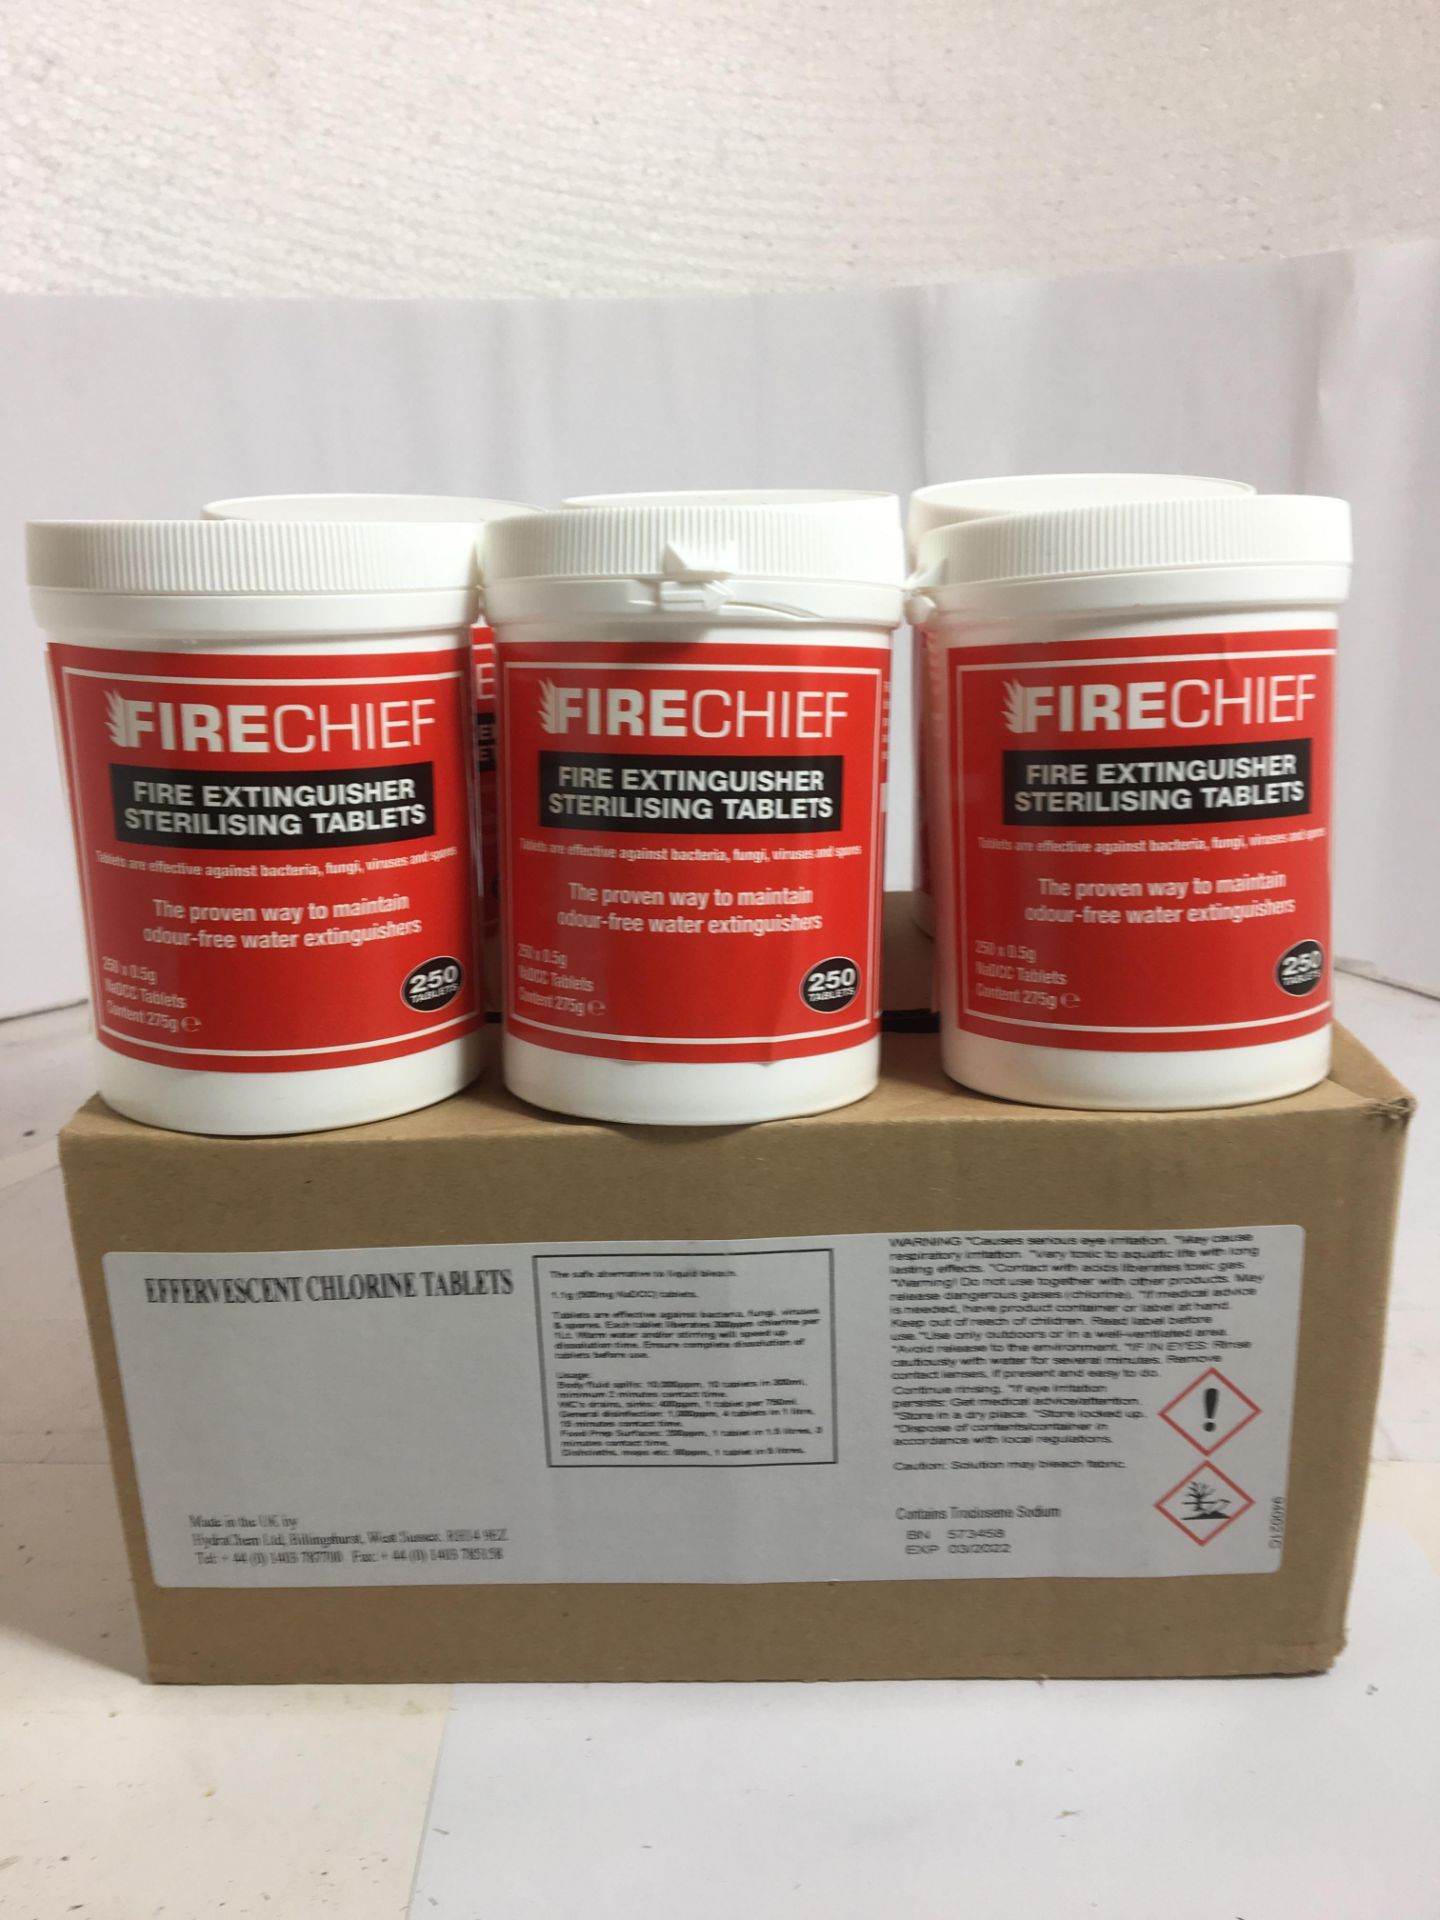 6 x Firechief Fire extinguisher sterilising tablets - Image 2 of 4